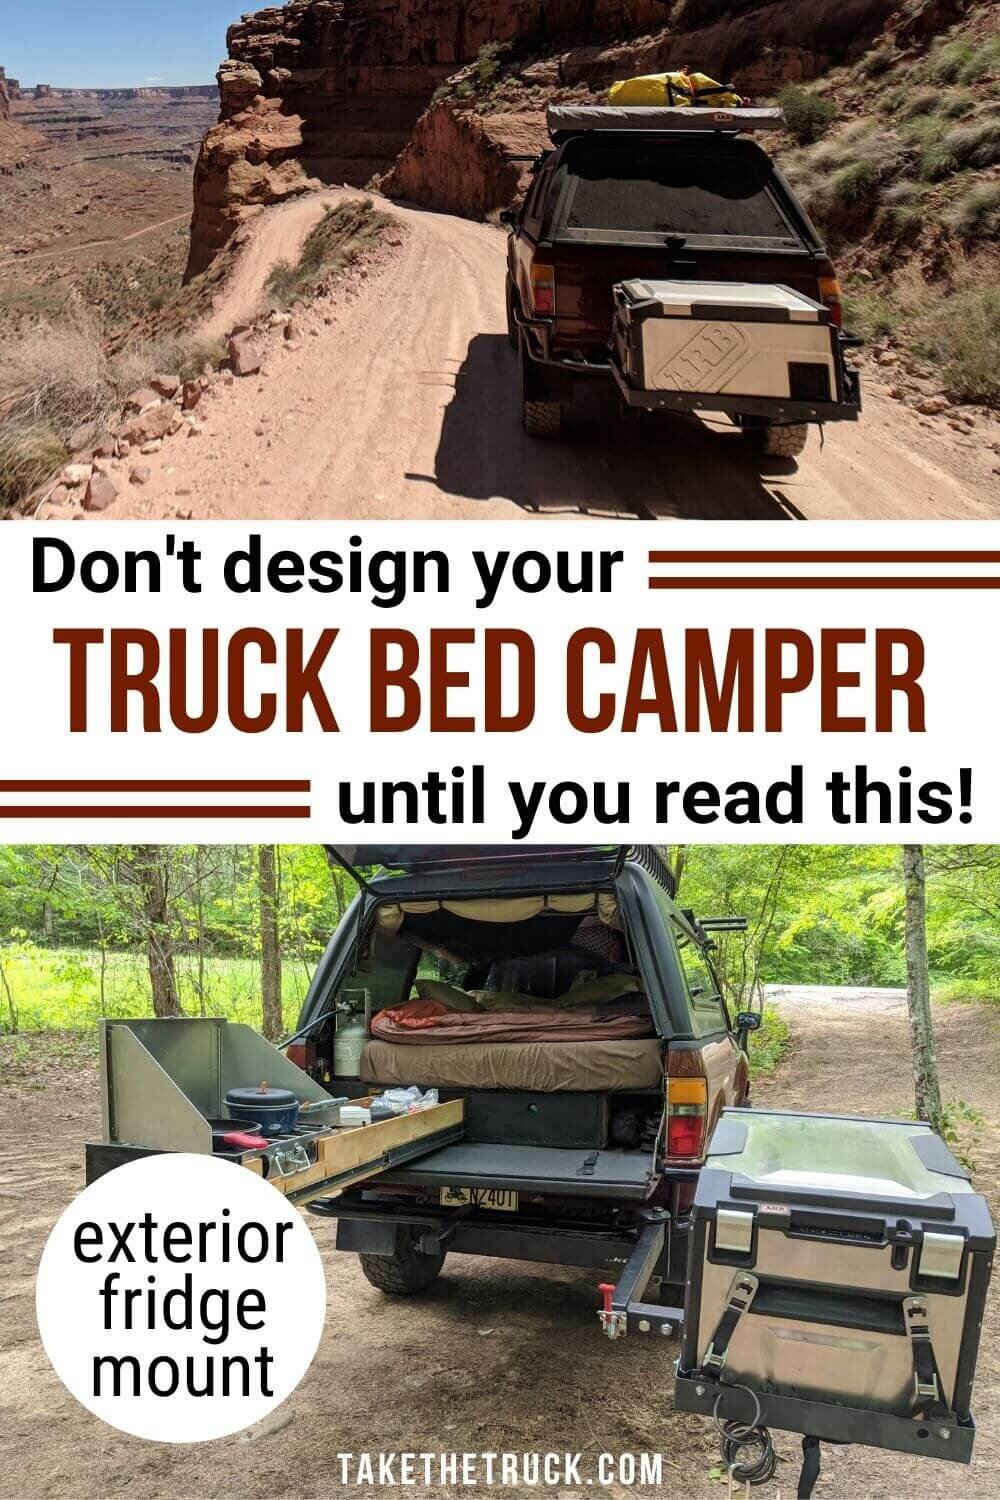 Rather than using a camping fridge slide, check out this DIY camping fridge hack for mounting off your hitch! This idea works especially well when truck bed camping with an ARB Elements Fridge.